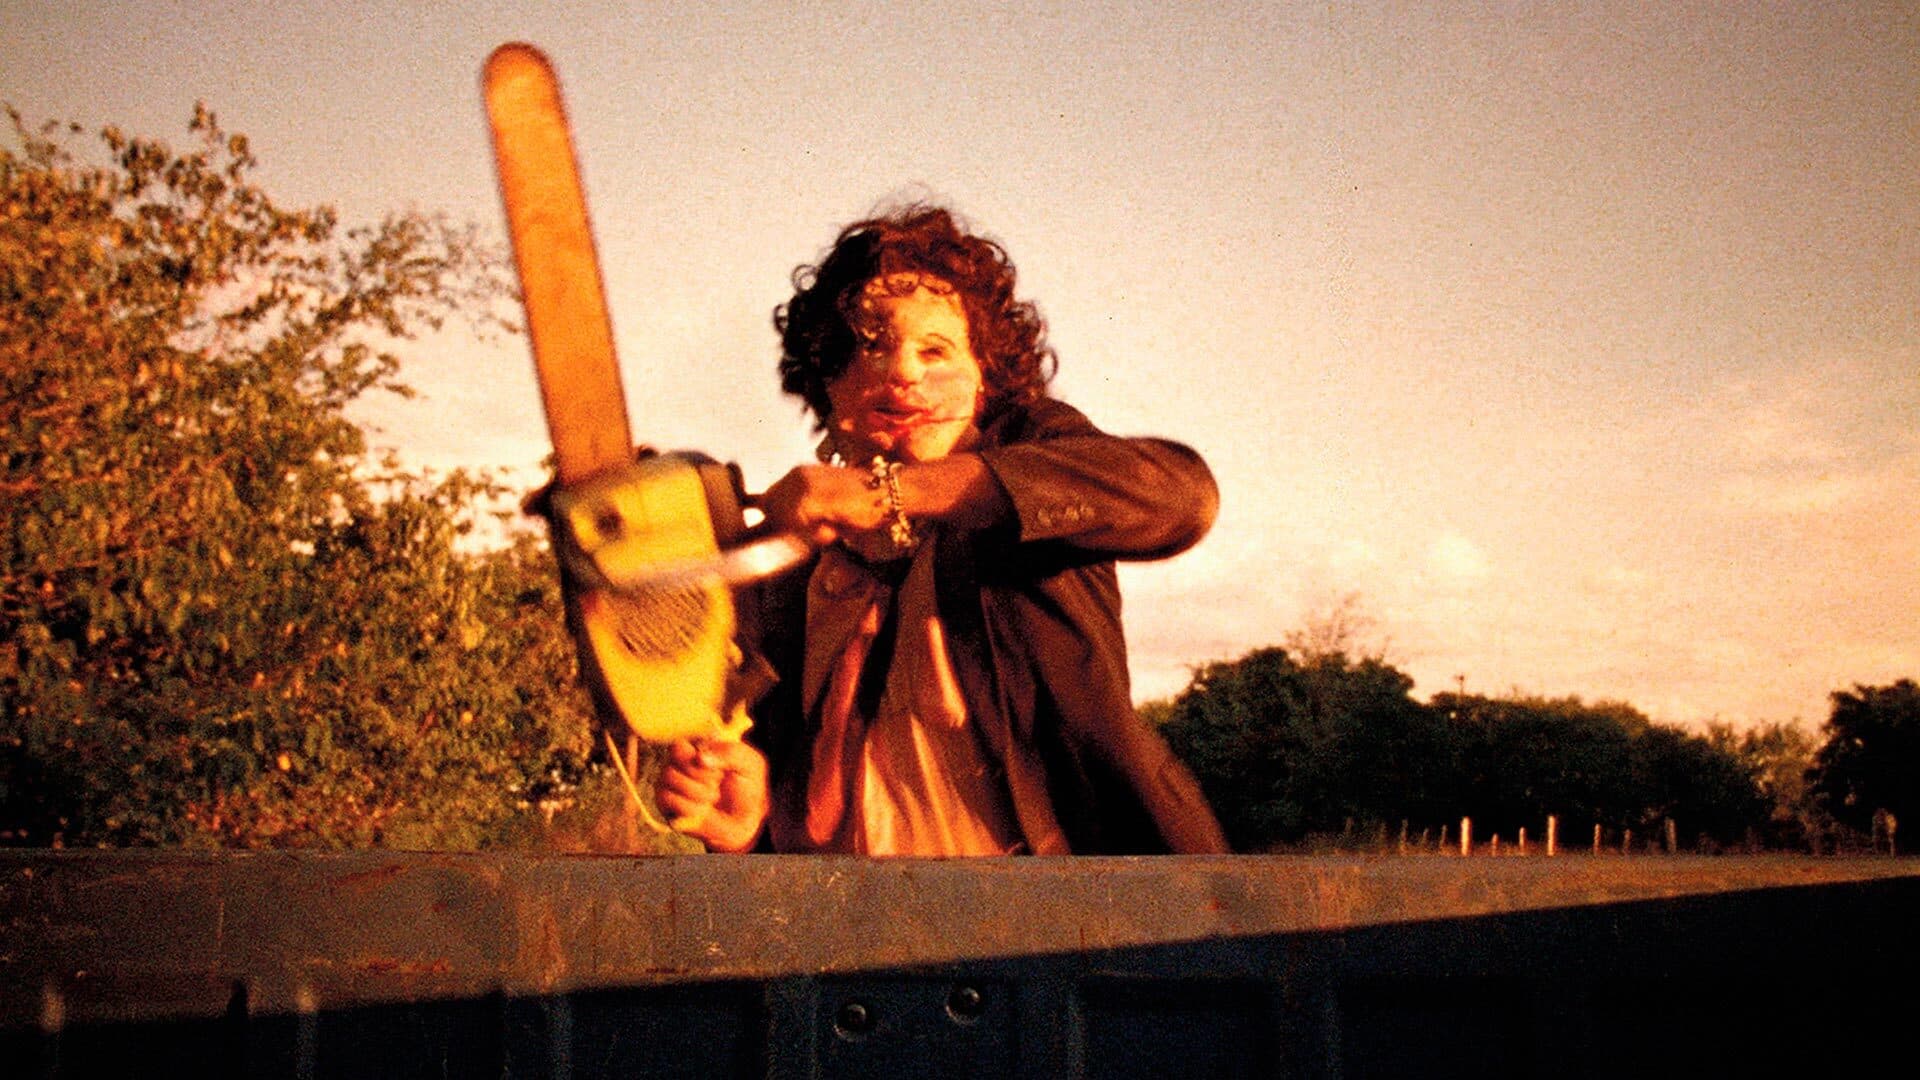 Still from “The Texas Chainsaw Massacre”